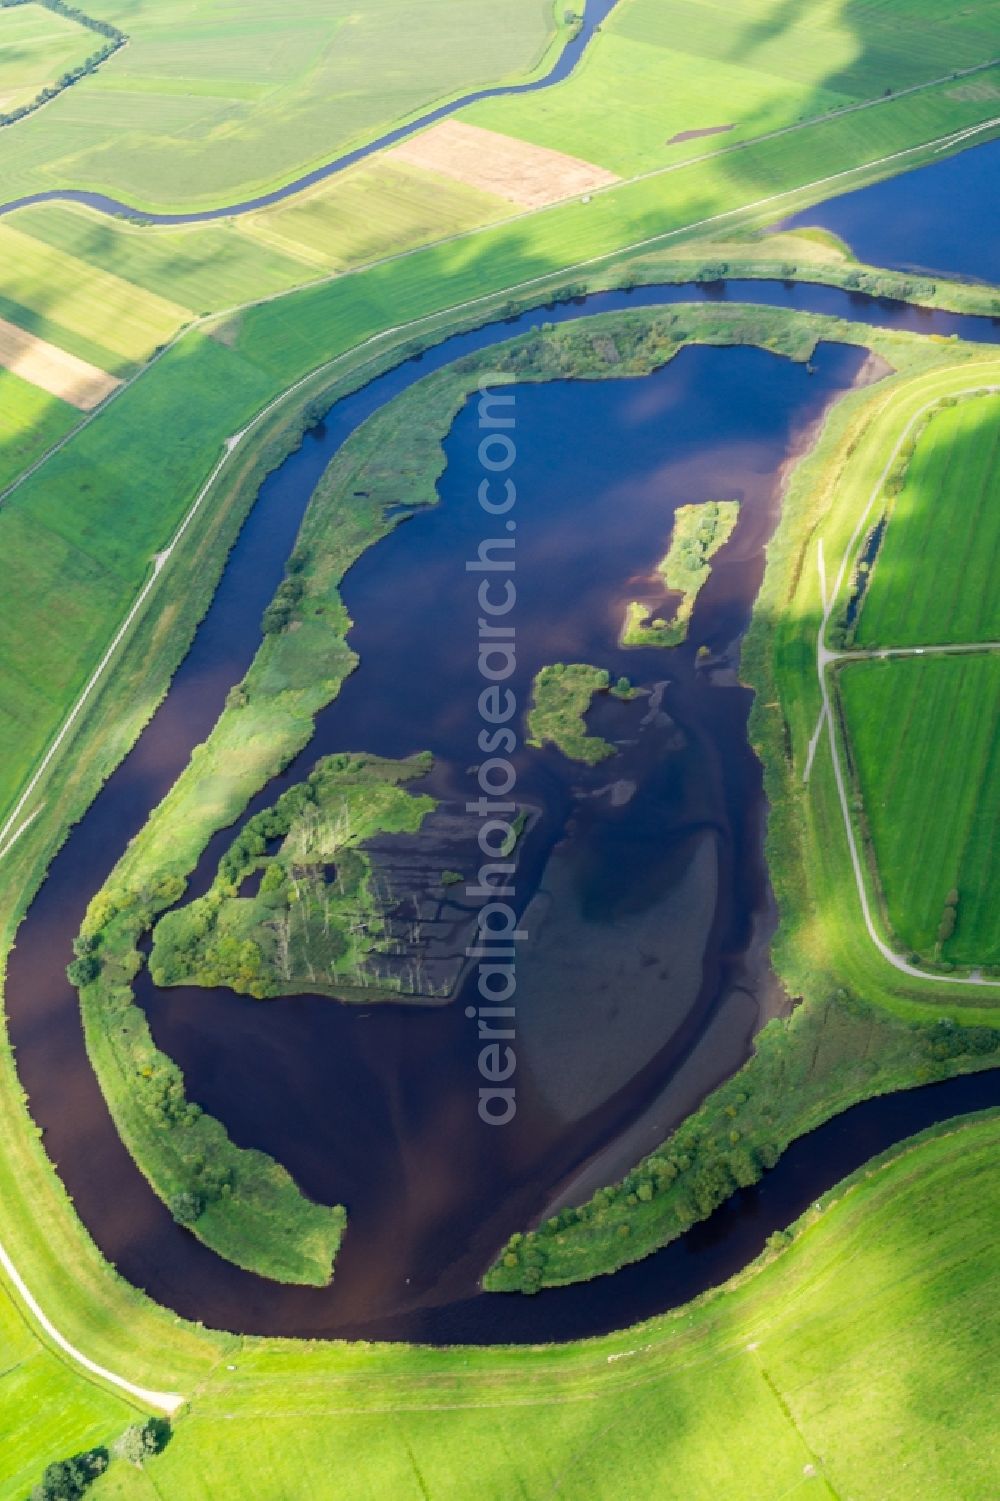 Estorf from the bird's eye view: Waterside of the floodwater meadows on the river Oste near Estorf in the state of Lower Saxony, Germany